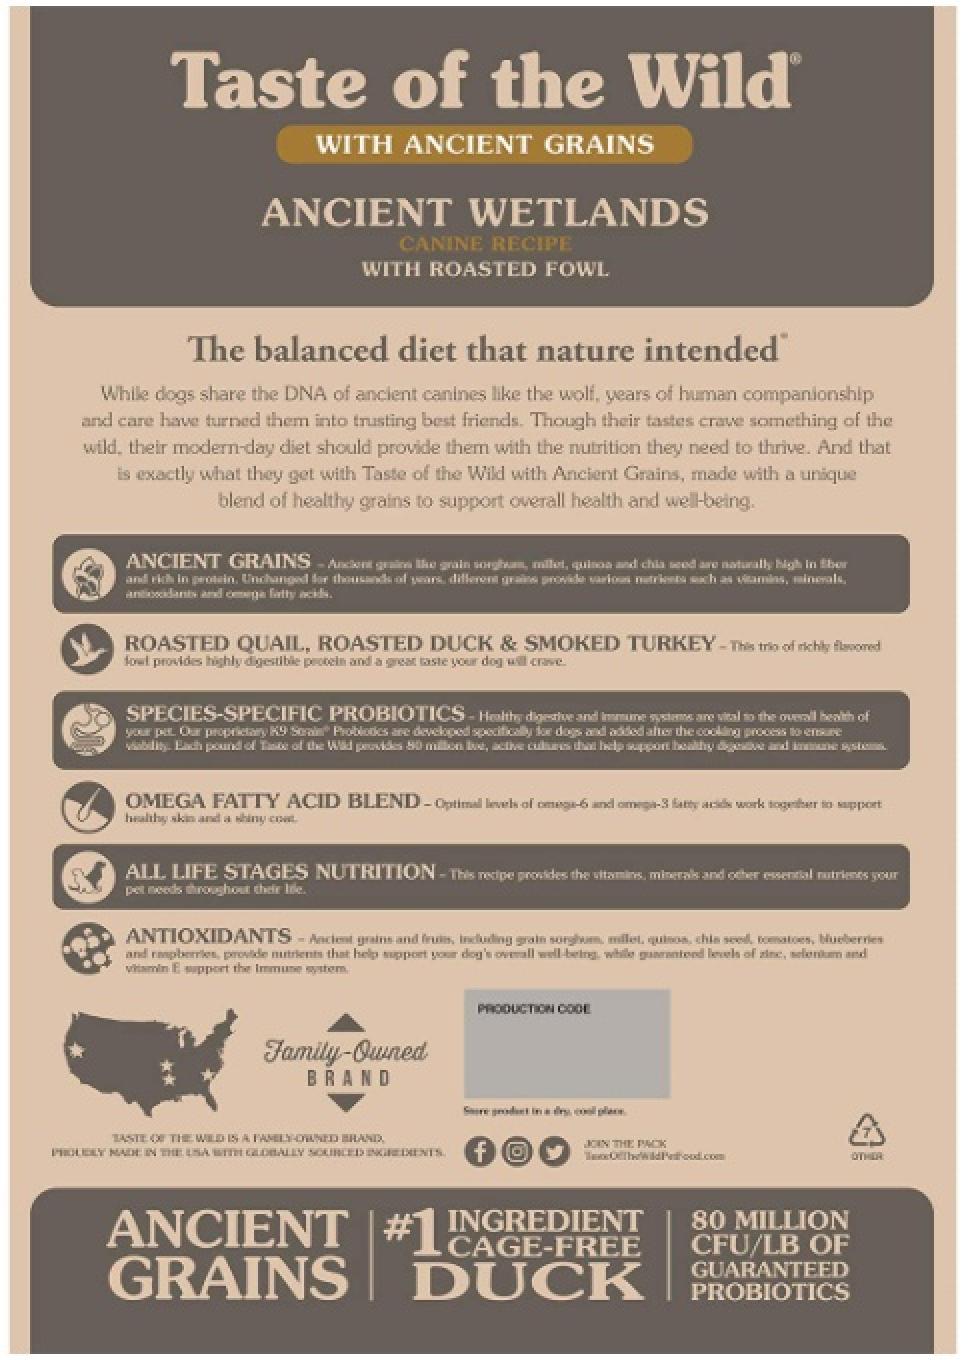 Taste of the Wild Ancient Wetlands with Roasted Fowl and Ancient Grains